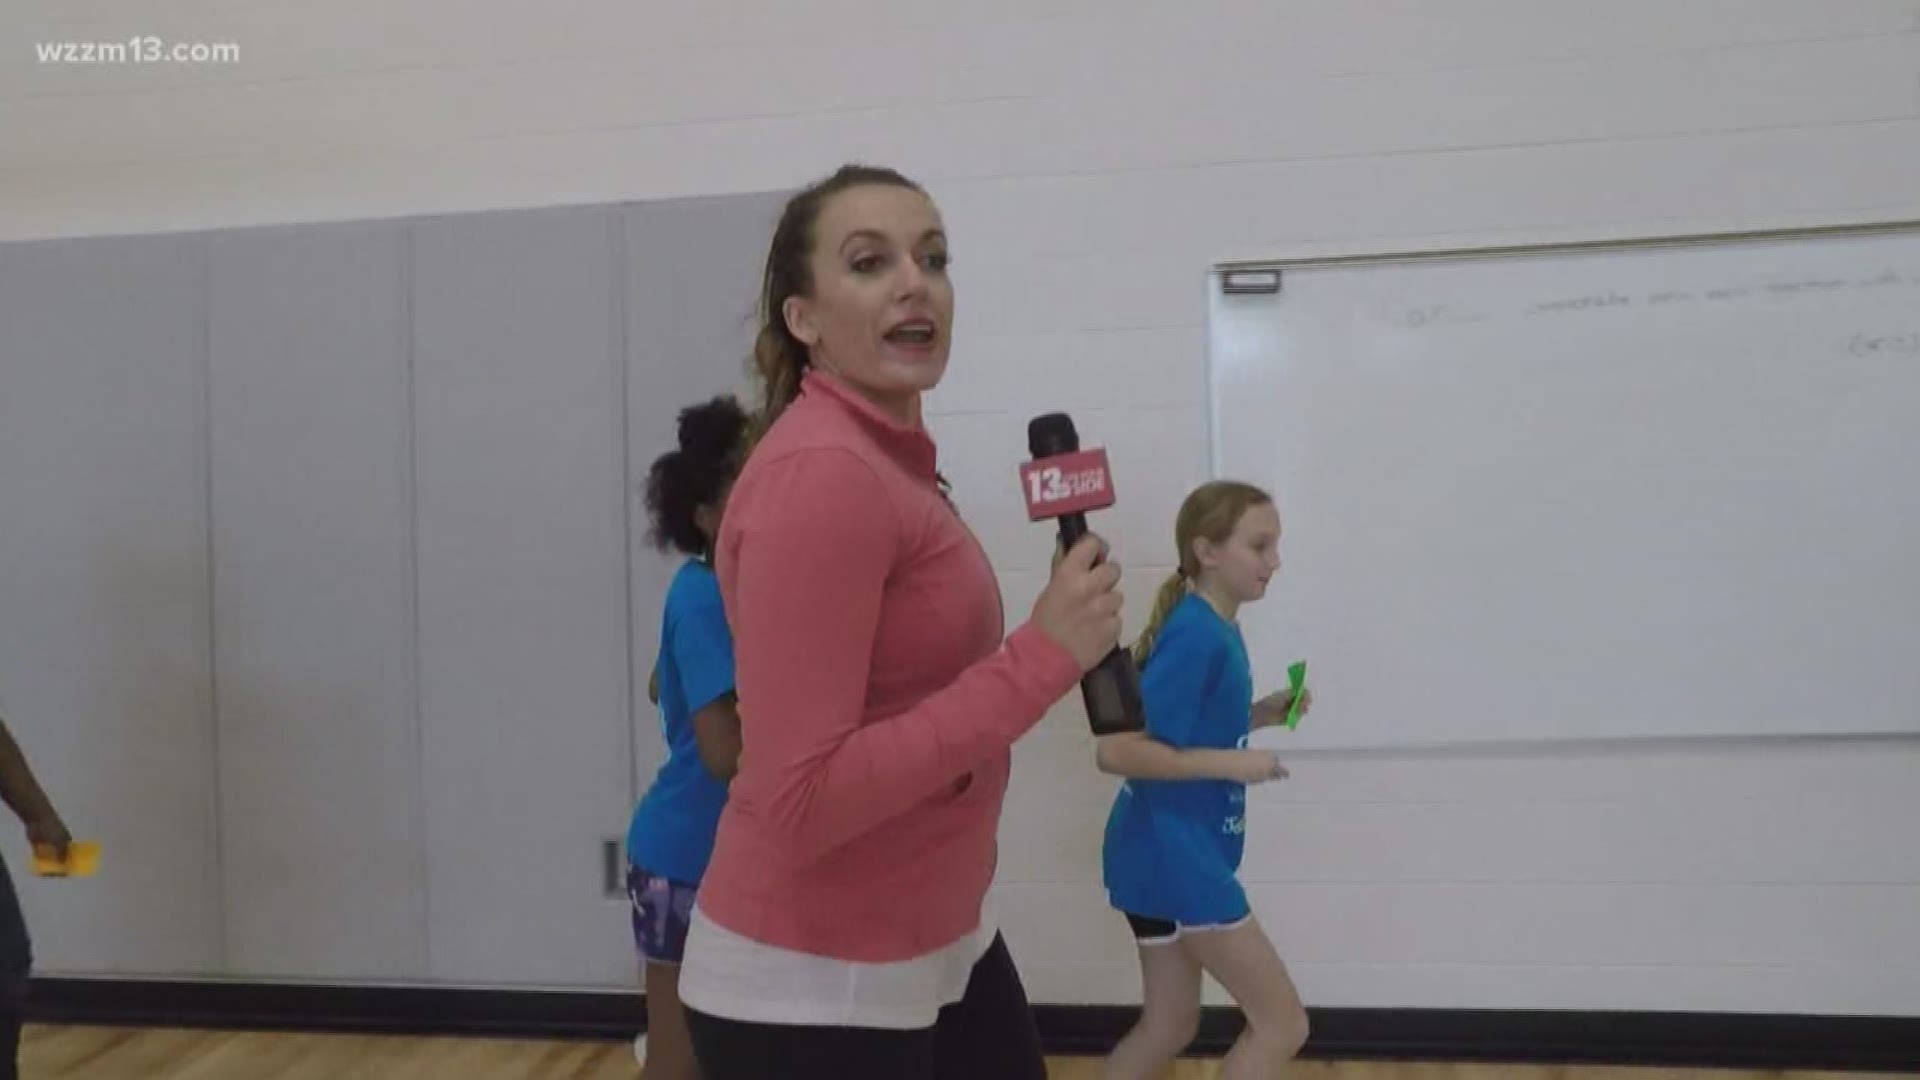 Girls on the Run program helps young girls